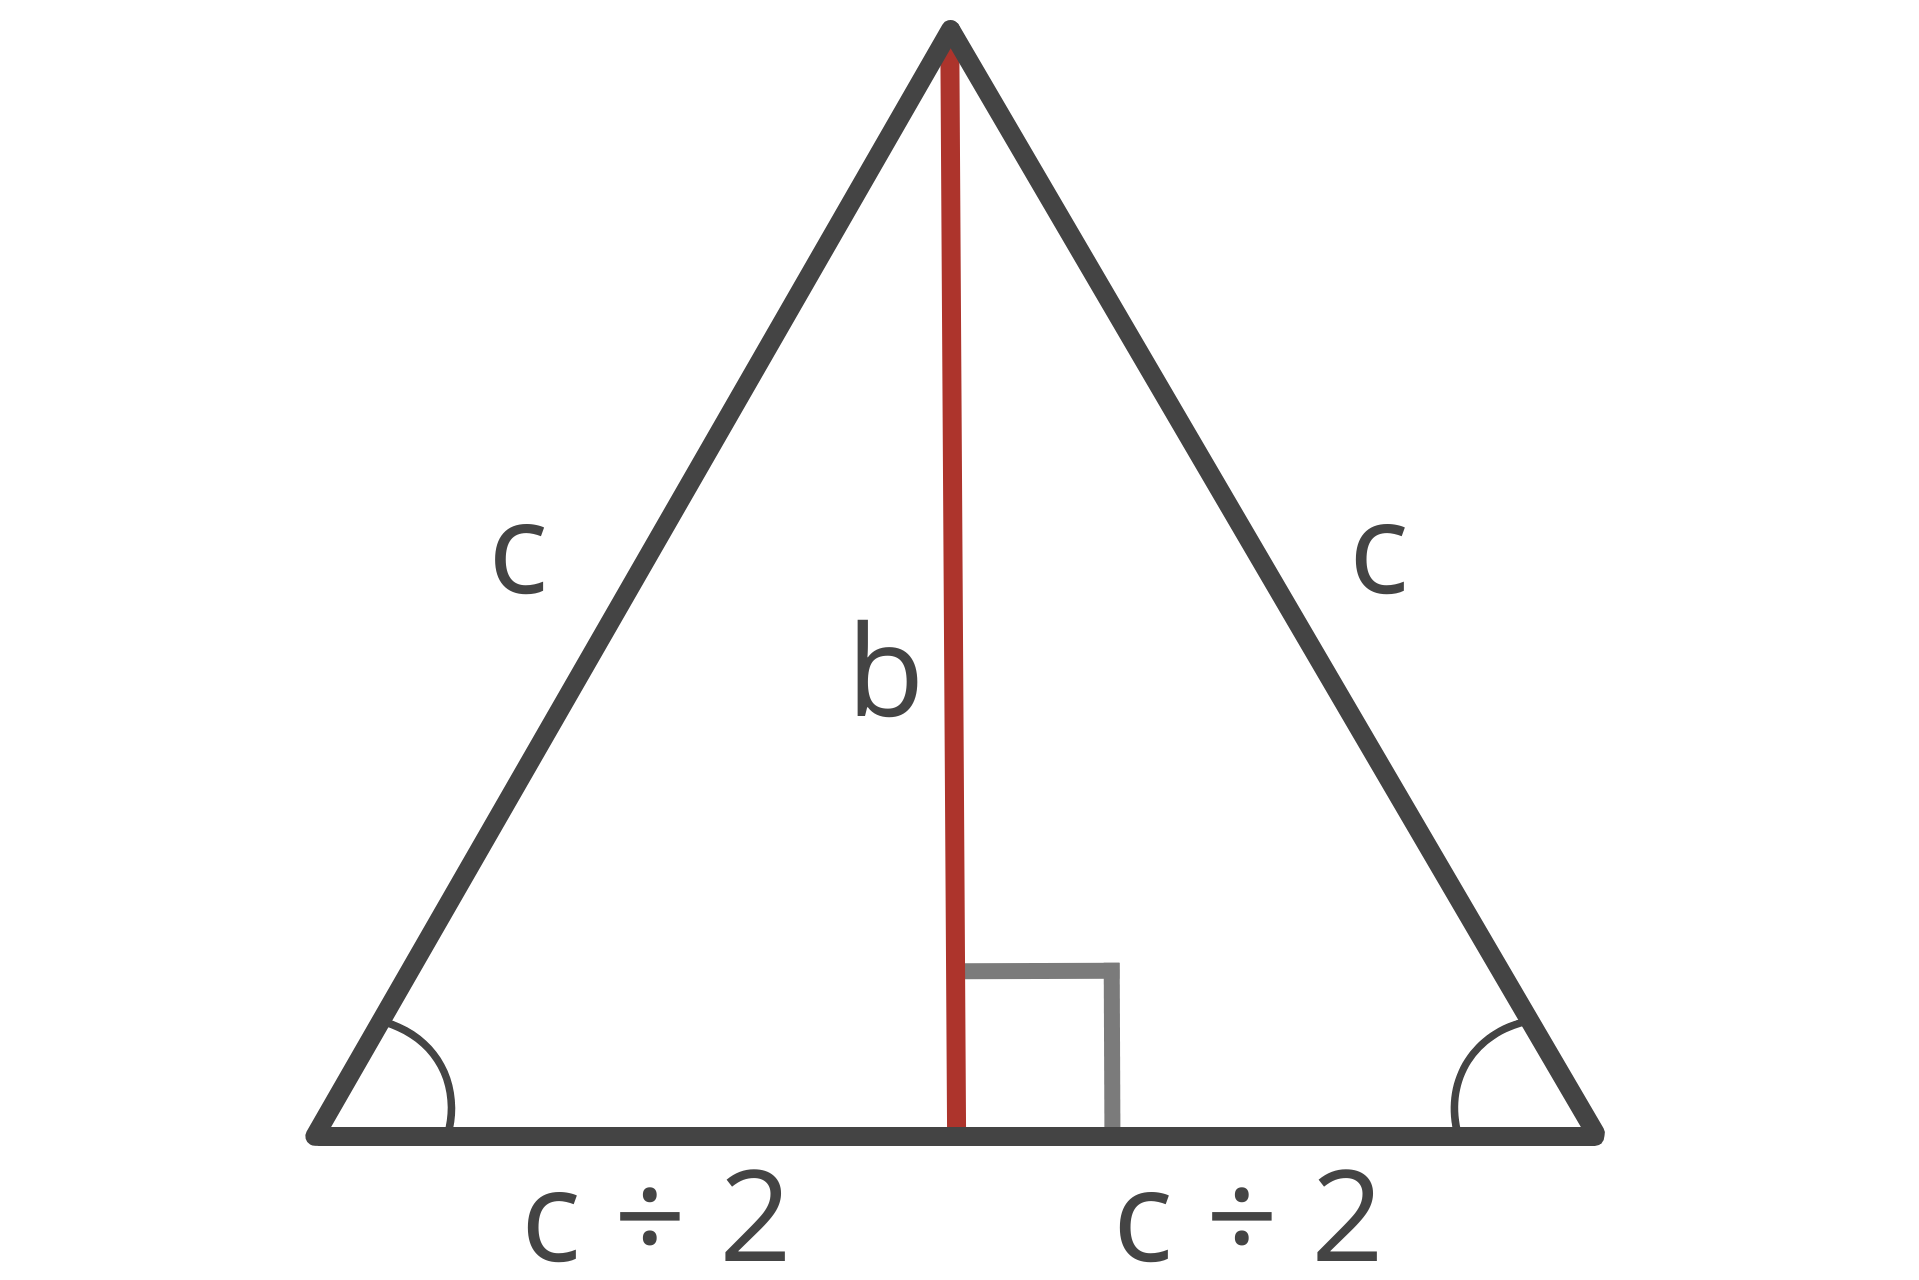 Graphic showing an equilateral triangle divided into two equal right triangles with sides a, b, and c.